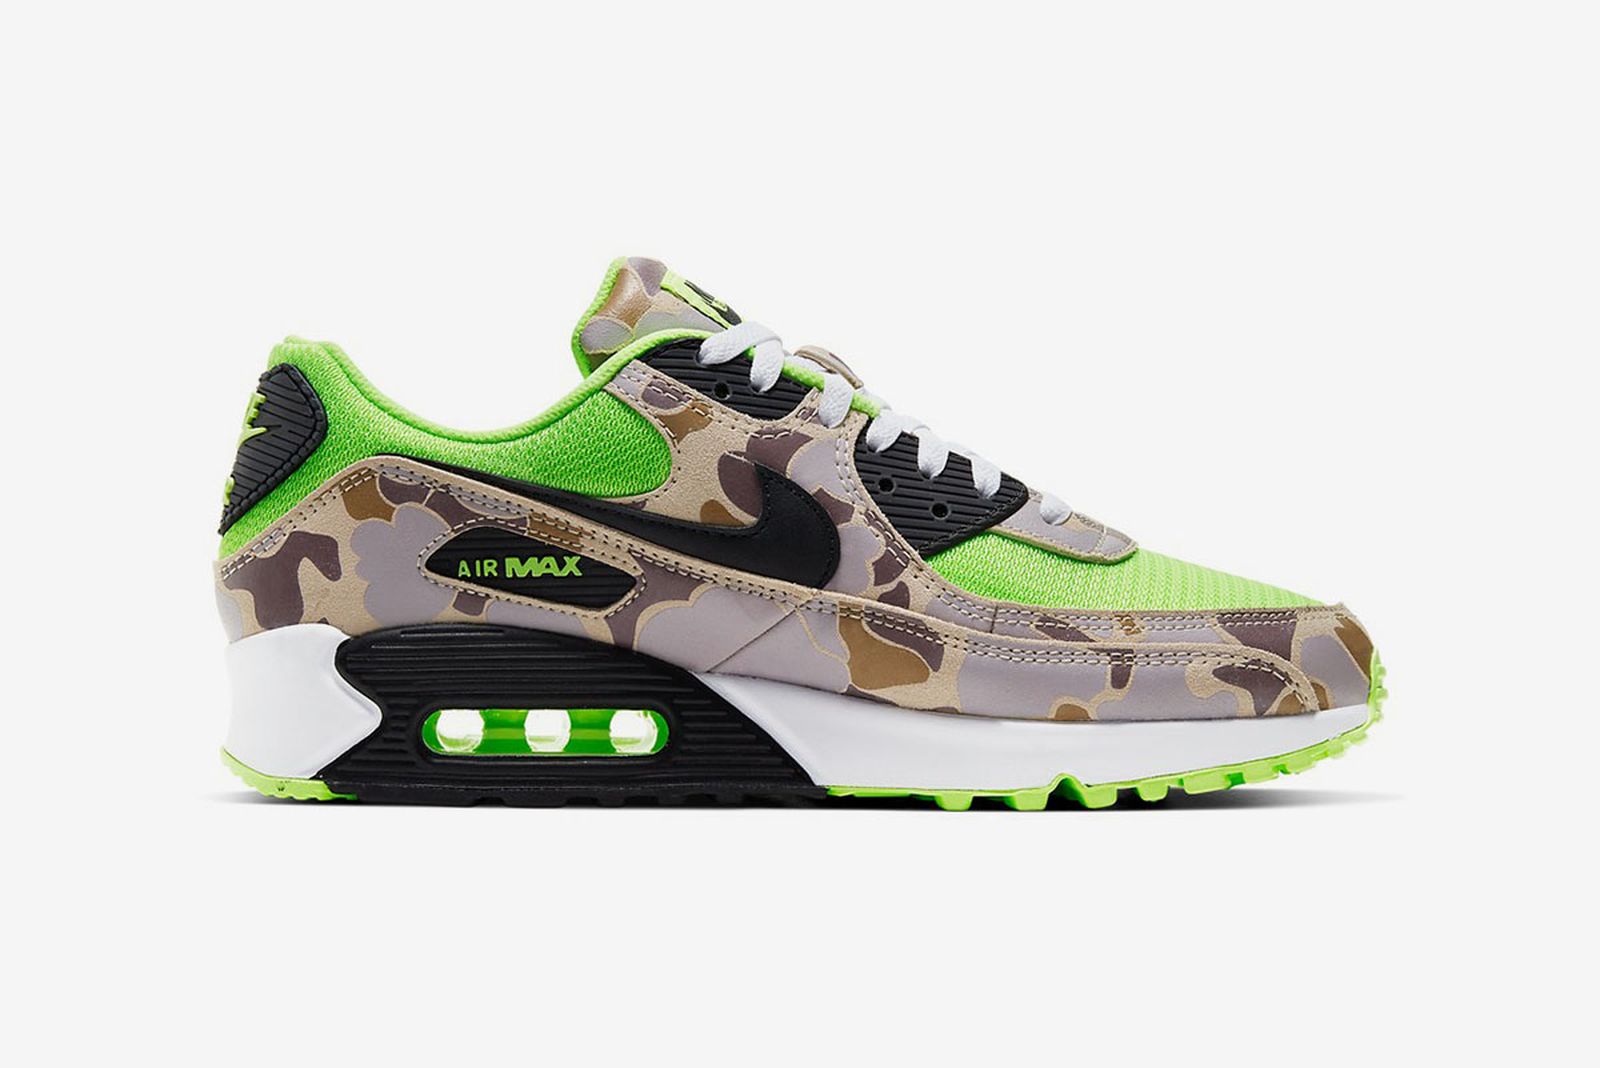 Preconception different Mona Lisa Nike Air Max 90 "Ghost Green Duck Camo": Where to Buy Today